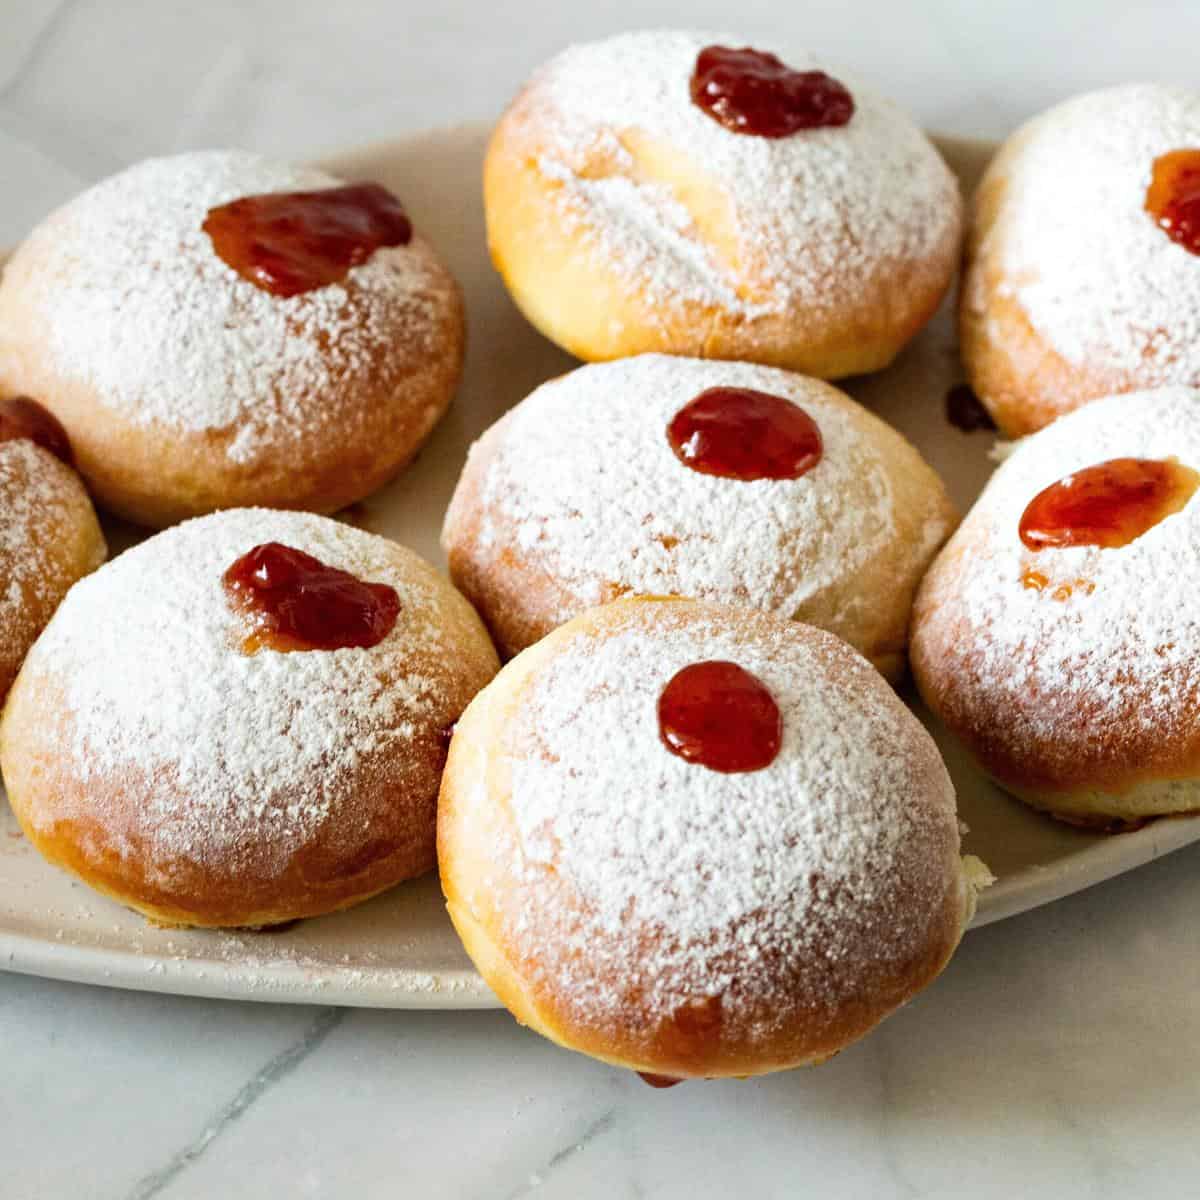 Jam donuts on the platter.